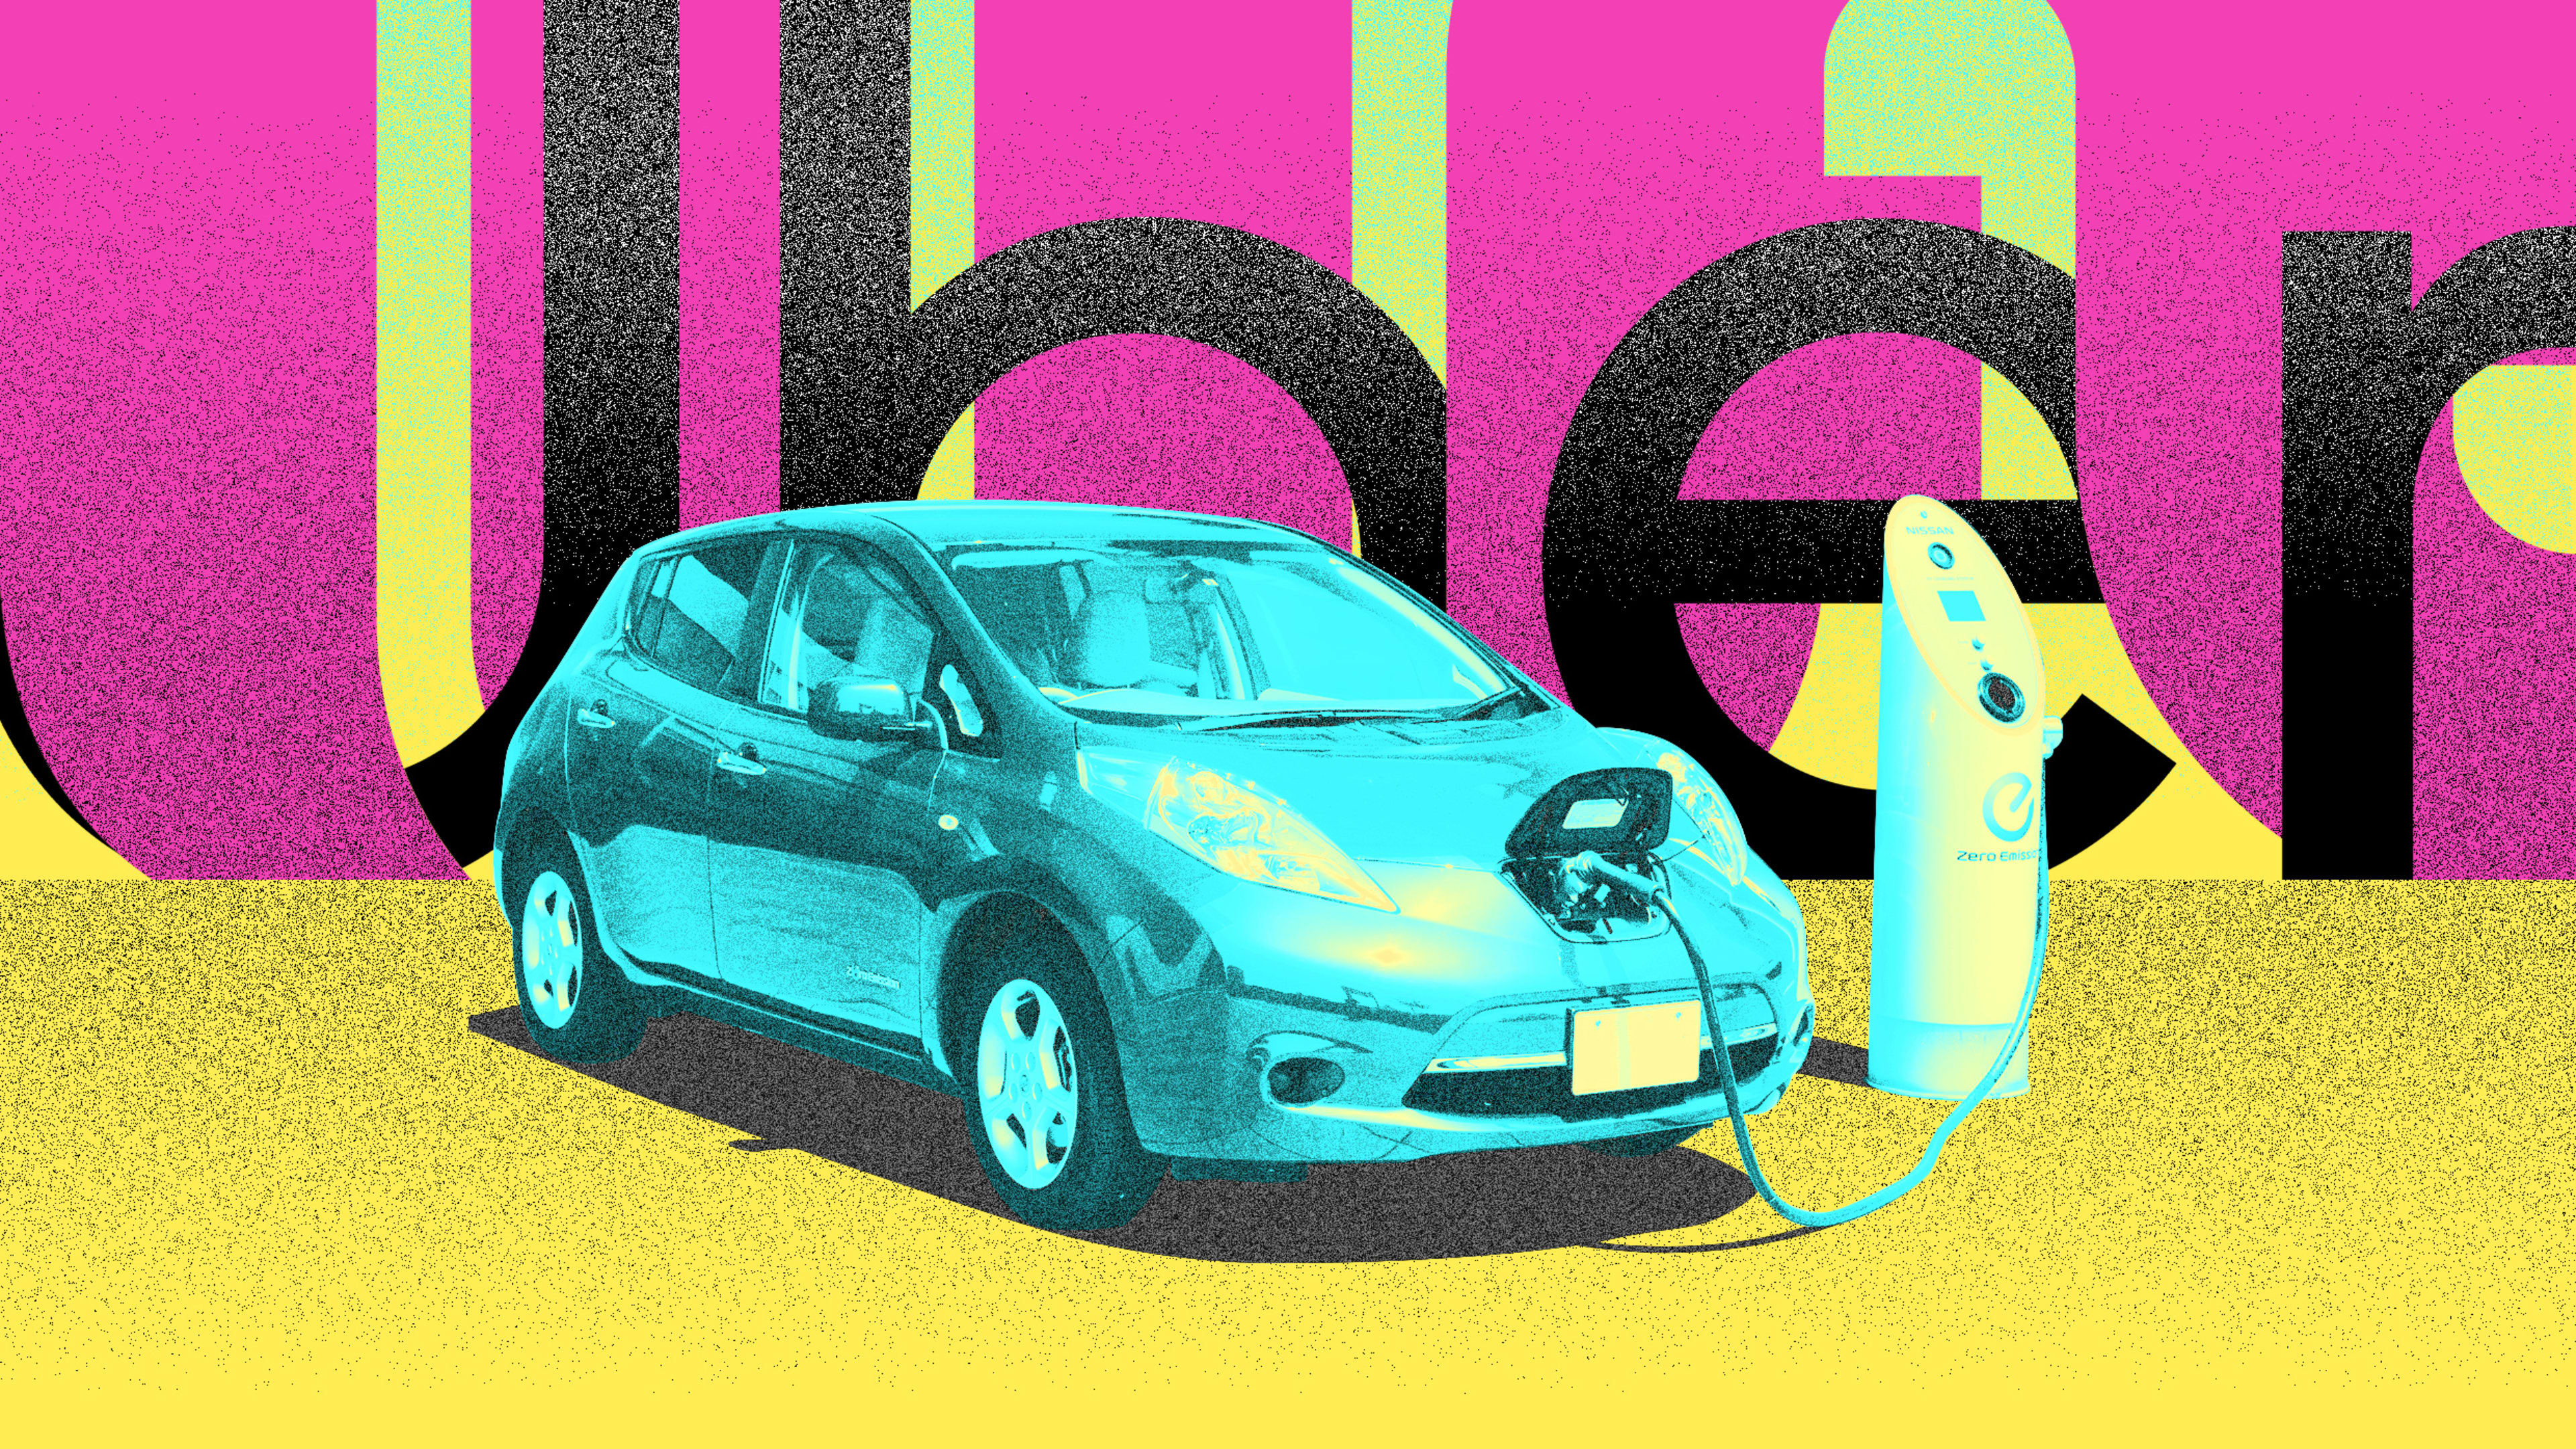 Uber and Lyft should electrify their fleets—before cities make them do it anyway